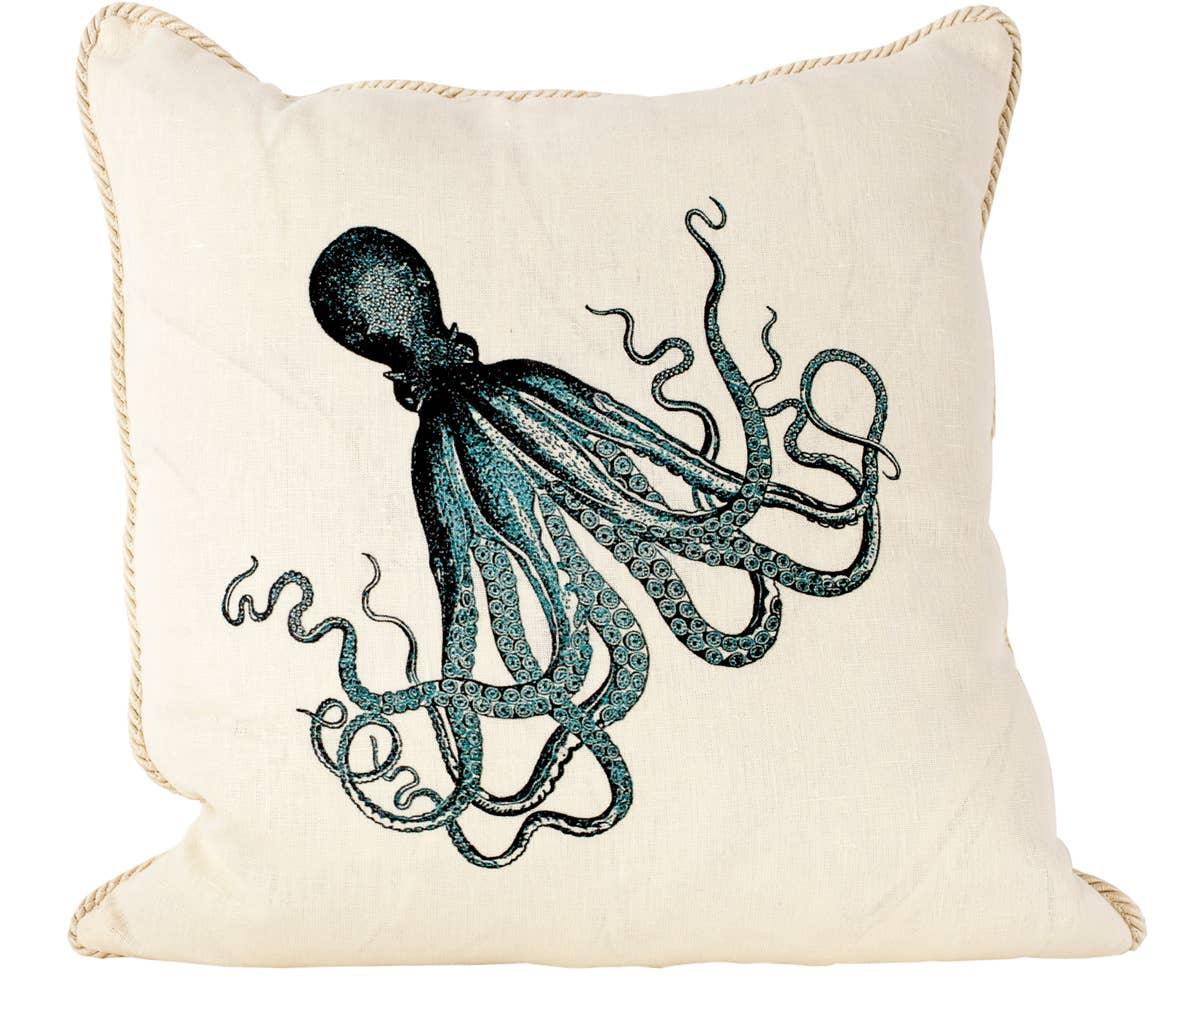 Octopus Pillow - The In Gate